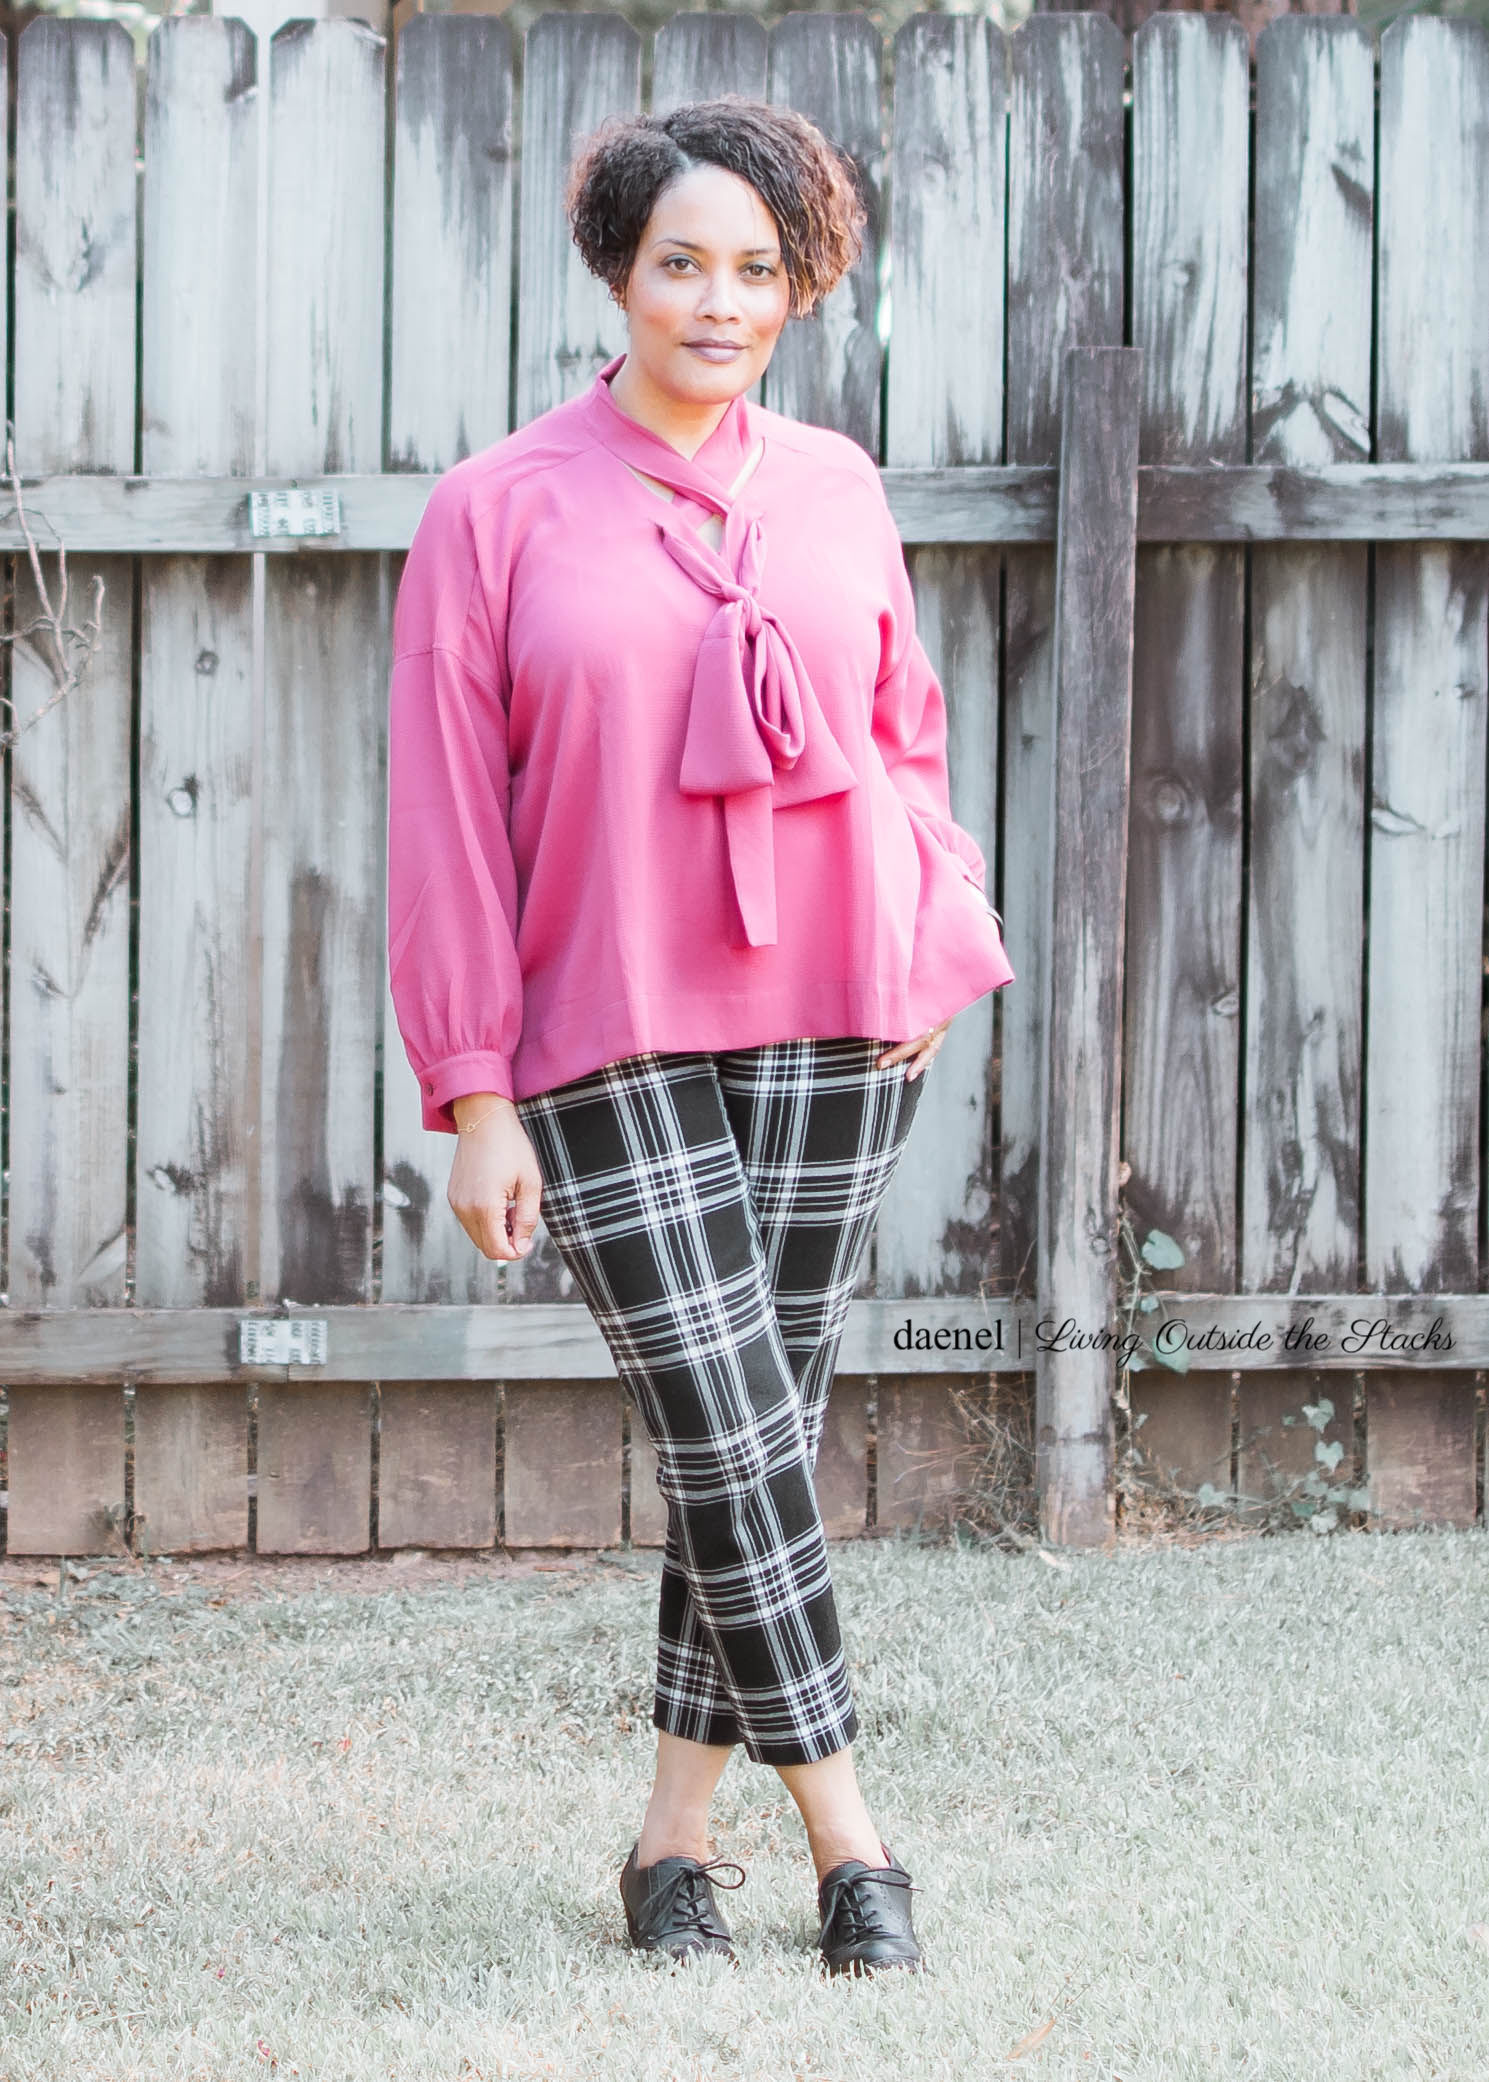 Cranberry Criss Cross Blouse by Laurie Felt Plaid Pixie Pants by Old Navy and Black Oxfords {living outside the stacks}